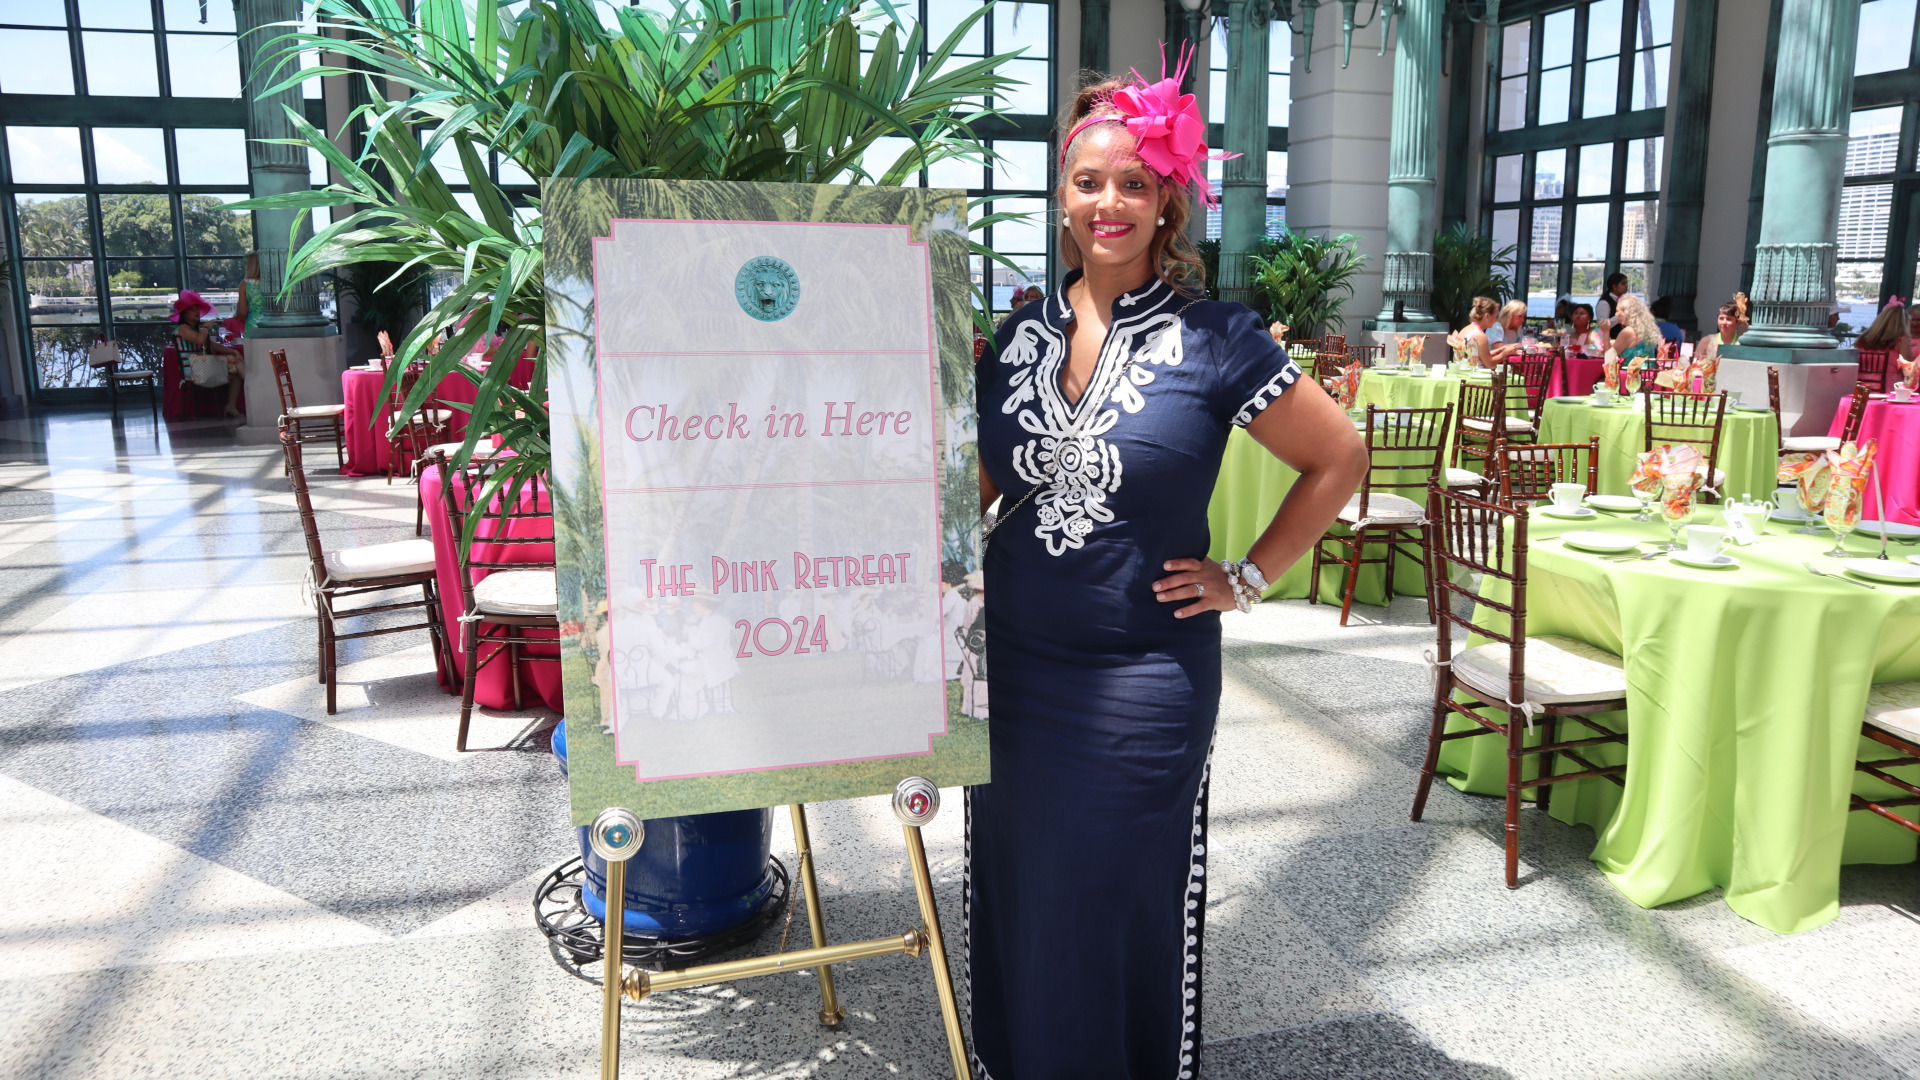 The Pink Retreat founder Tosha Williams. Image: courtesy The Pink Retreat.